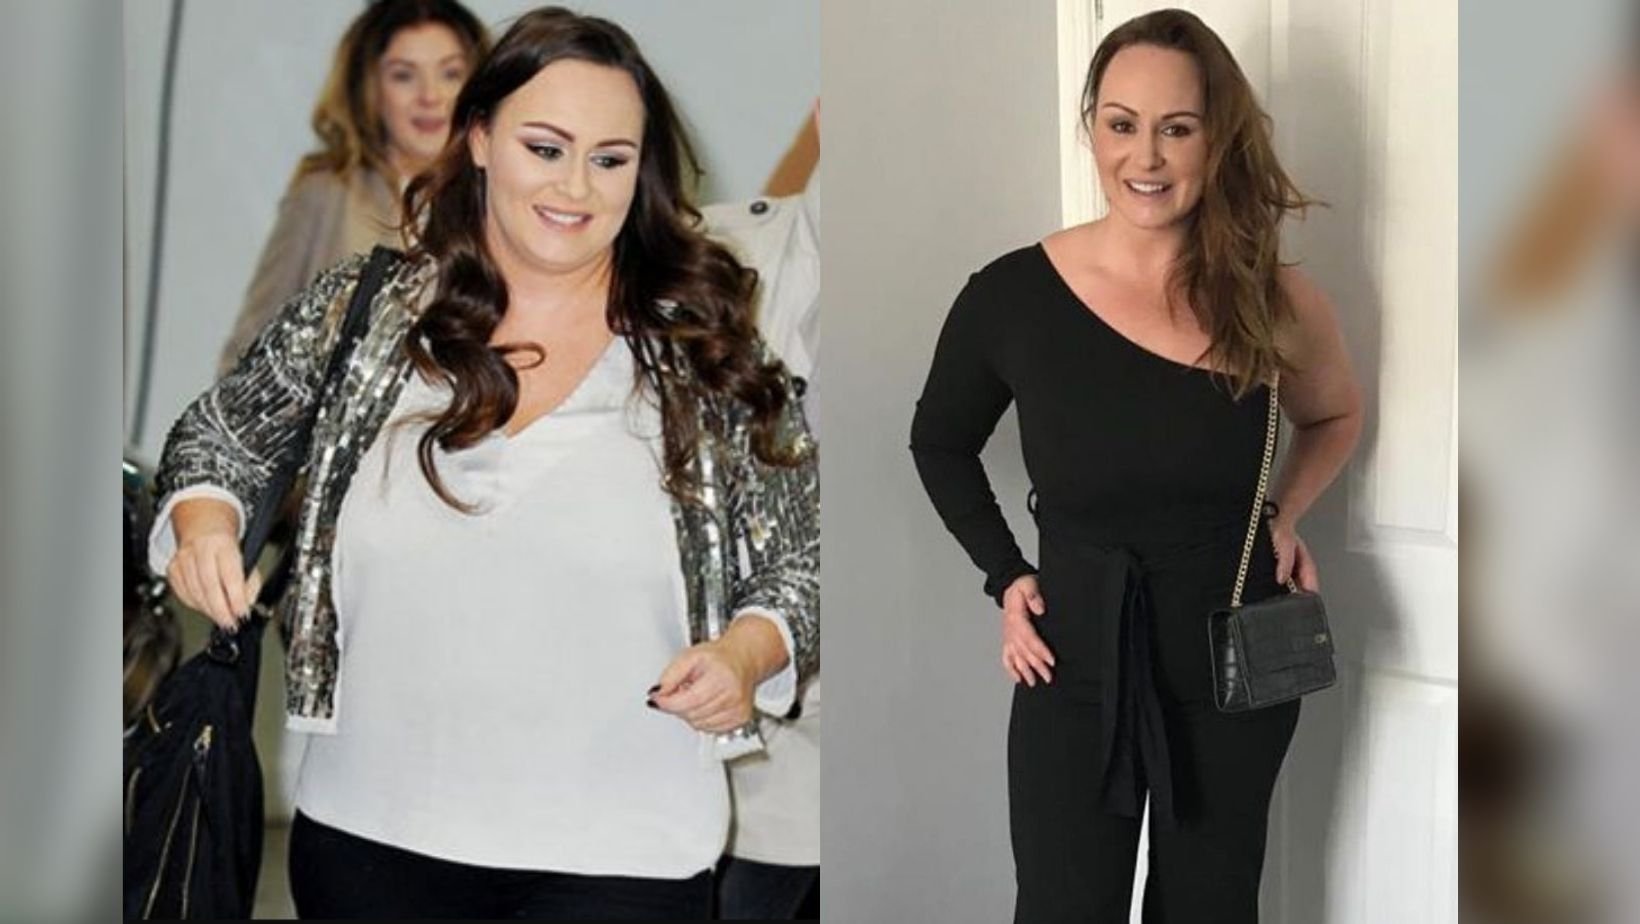 small joys thumbnail 2 3.jpg?resize=412,232 - Chanelle Hayes Shows Off INCREDIBLE Weight Loss Transformation After Quitting Years Of Unhealthy Lifestyle